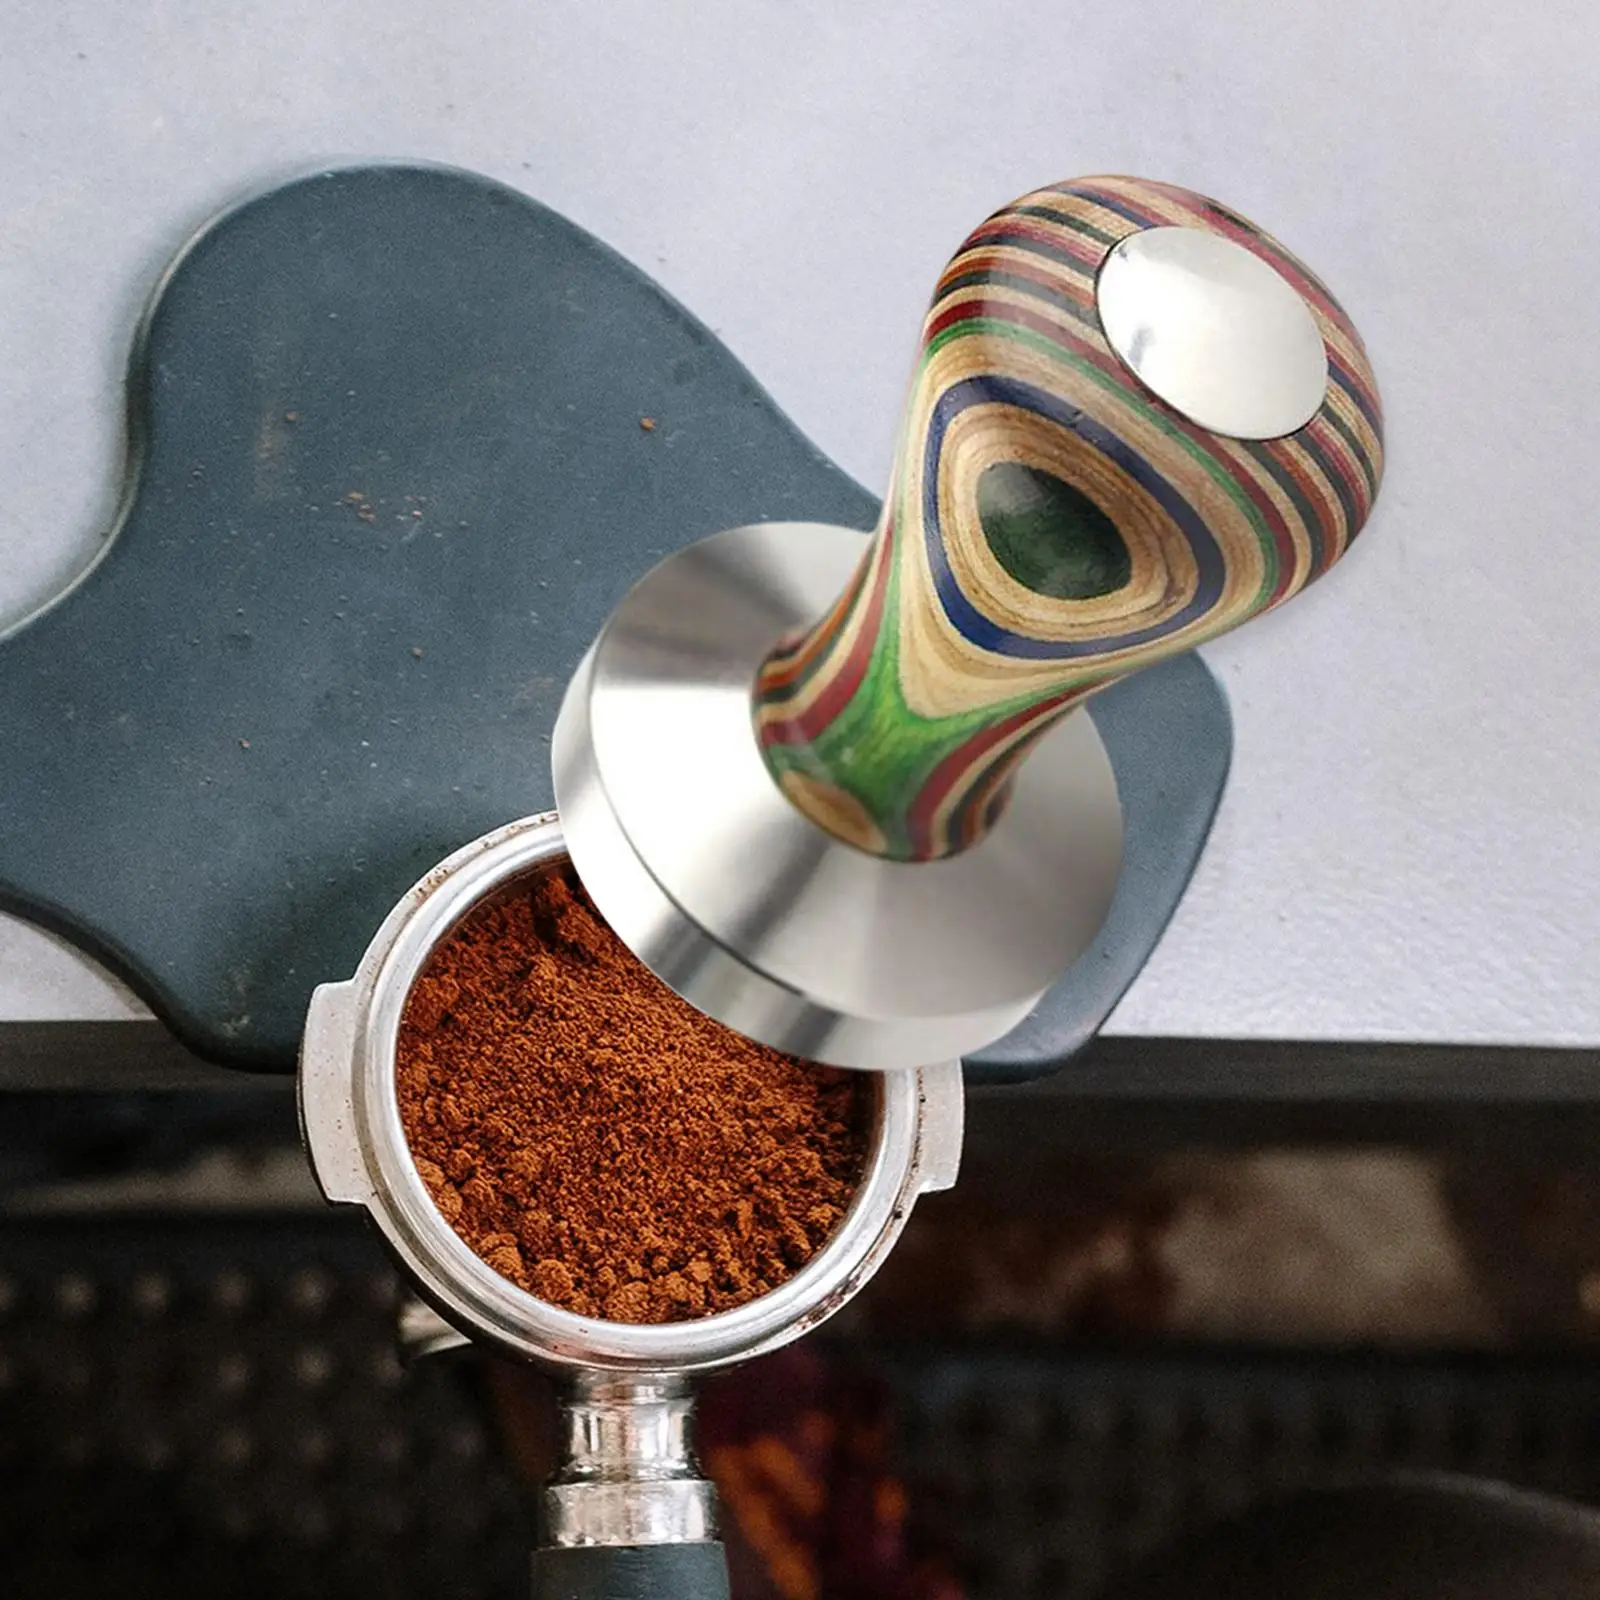 58mm Coffee Tamper Creative Colorful Wood Handle with Flat Base Coffee Bean Pressing Utensils Stainless Steel for Barista Gift